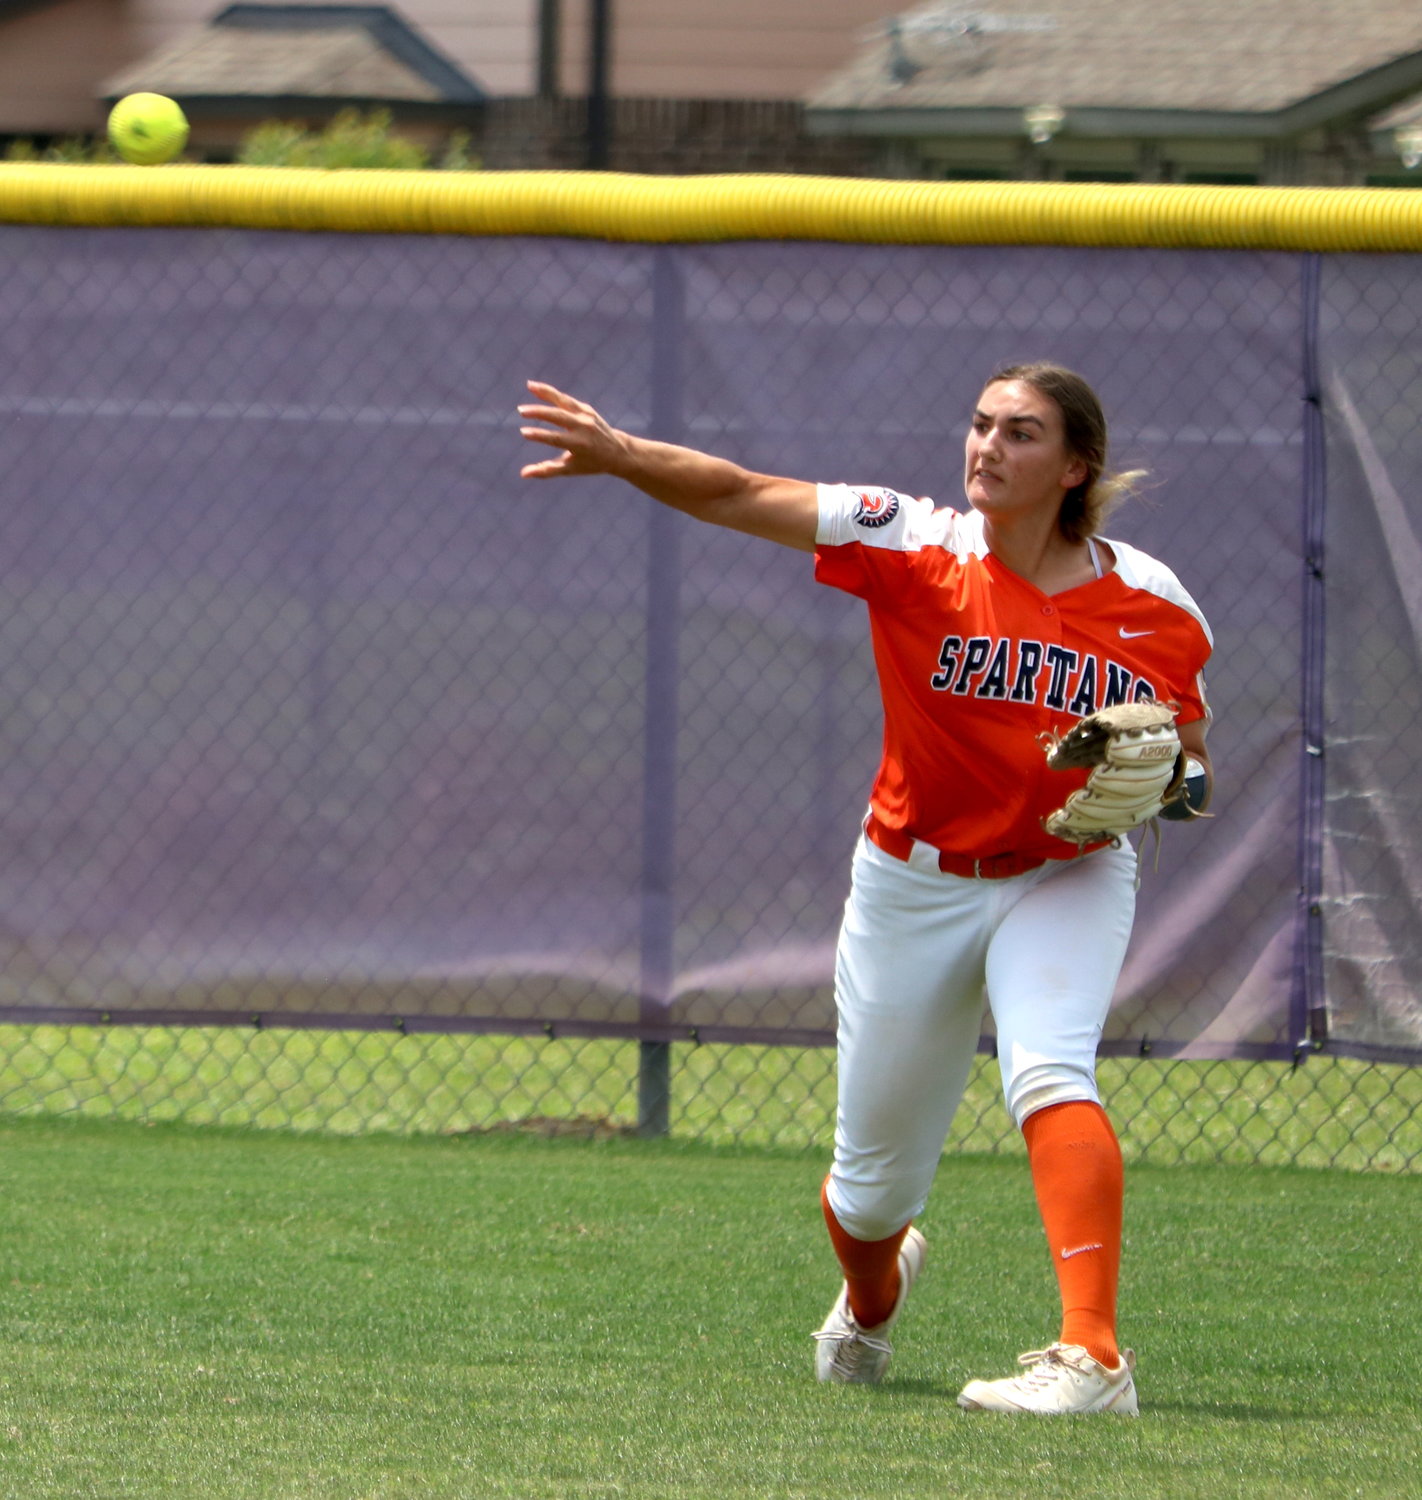 Meghan Kelly throws a ball towards home plate during Saturday’s bi-district round game between Seven Lakes and Ridge Point at the Ridge Point softball field.